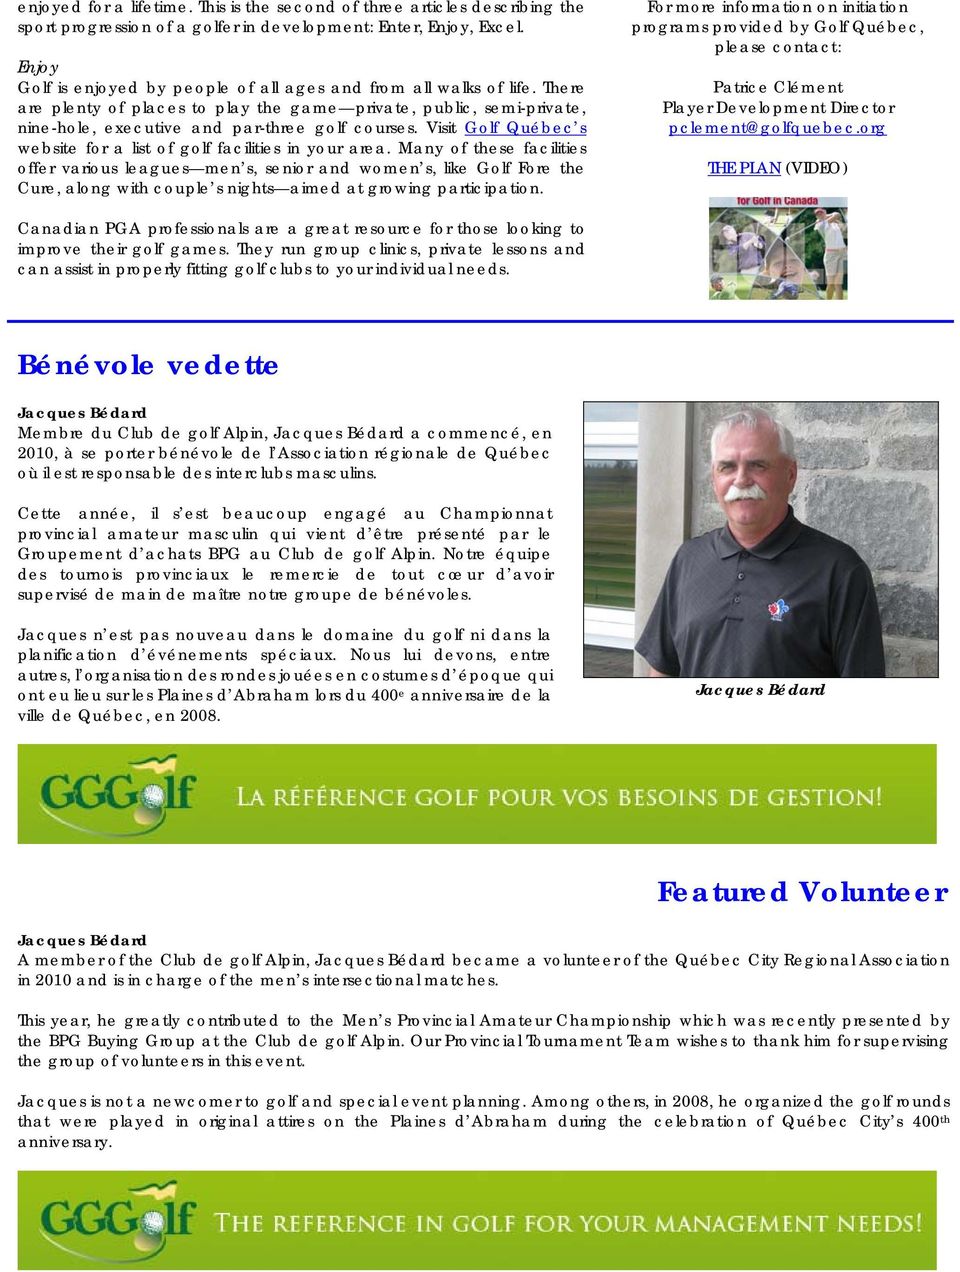 Visit Golf Québec s website for a list of golf facilities in your area.